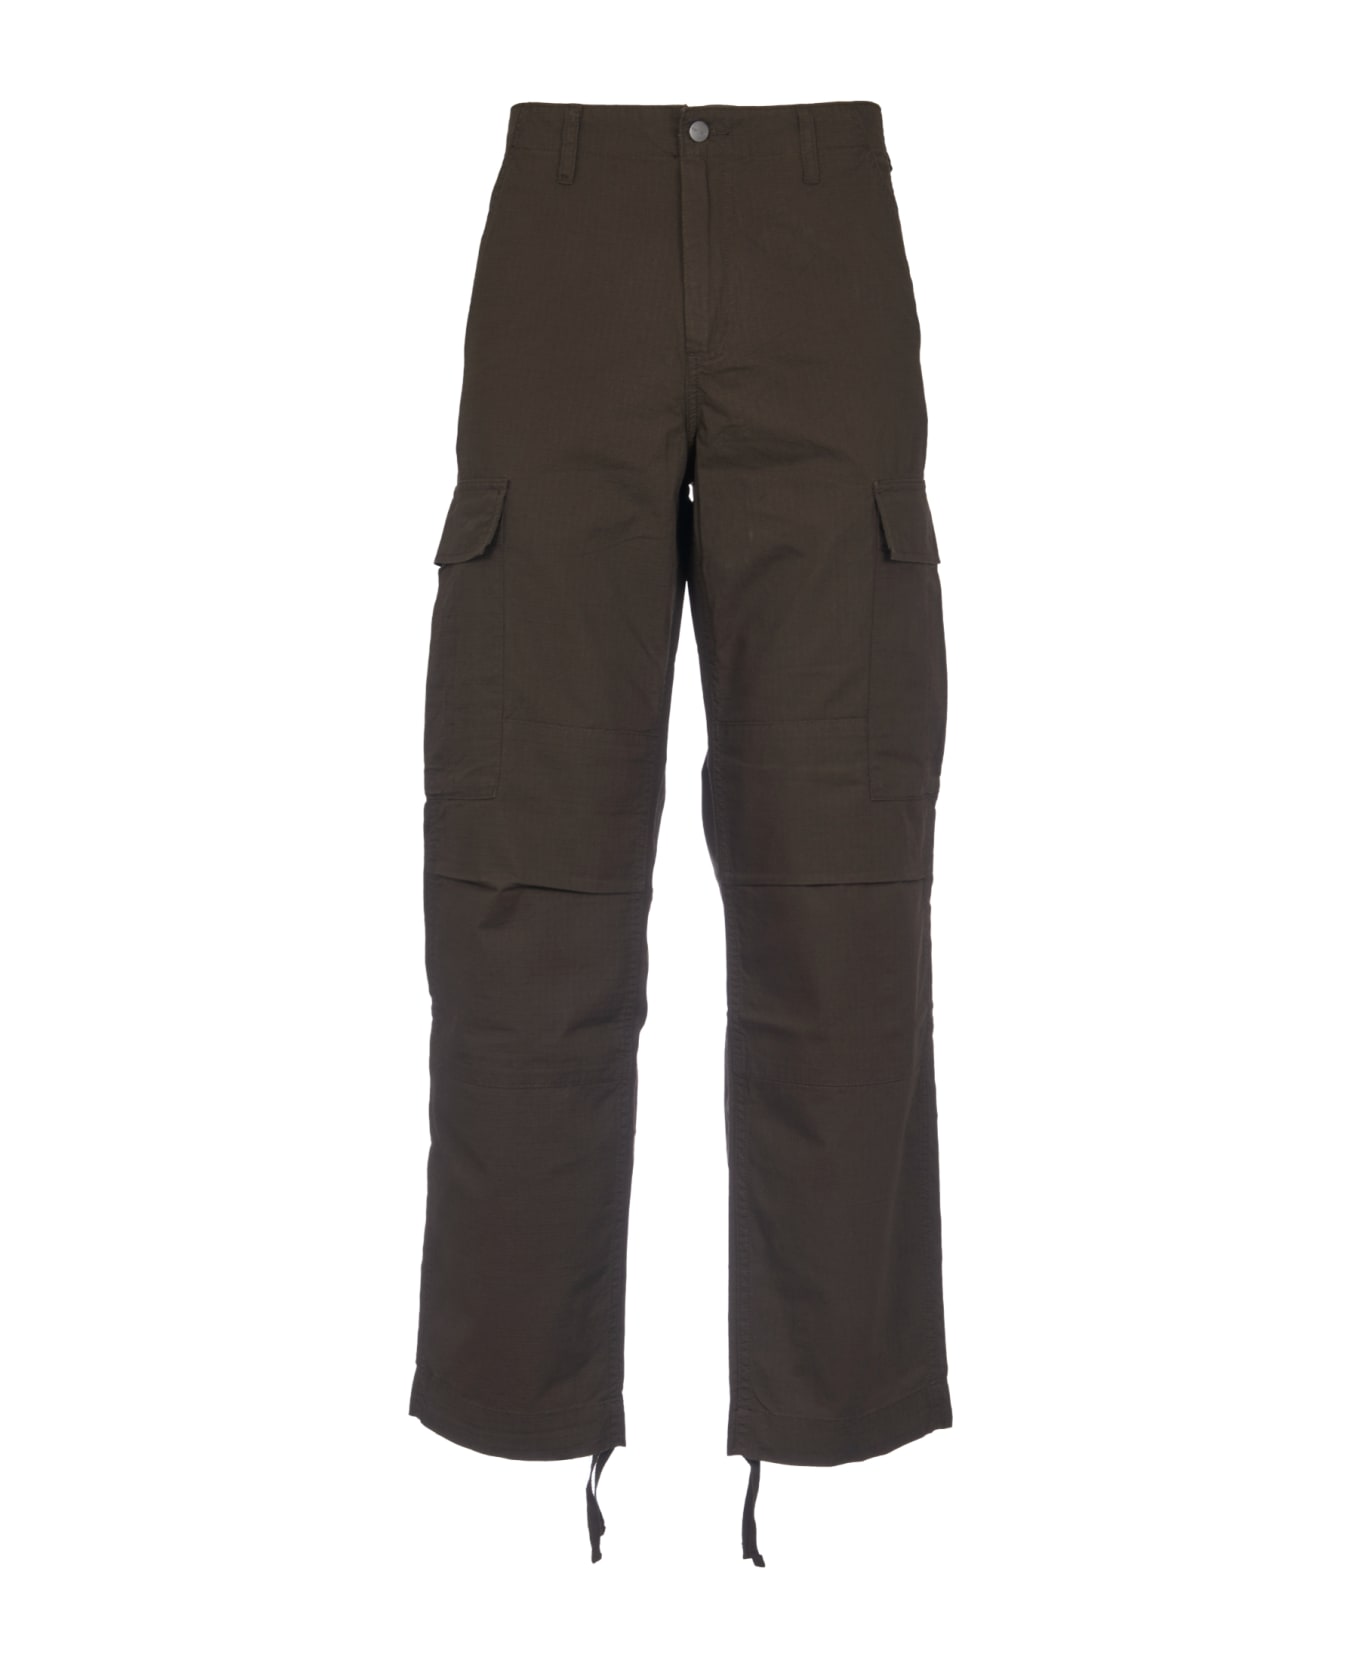 Carhartt Cargo Buttoned Trousers - Tobacco